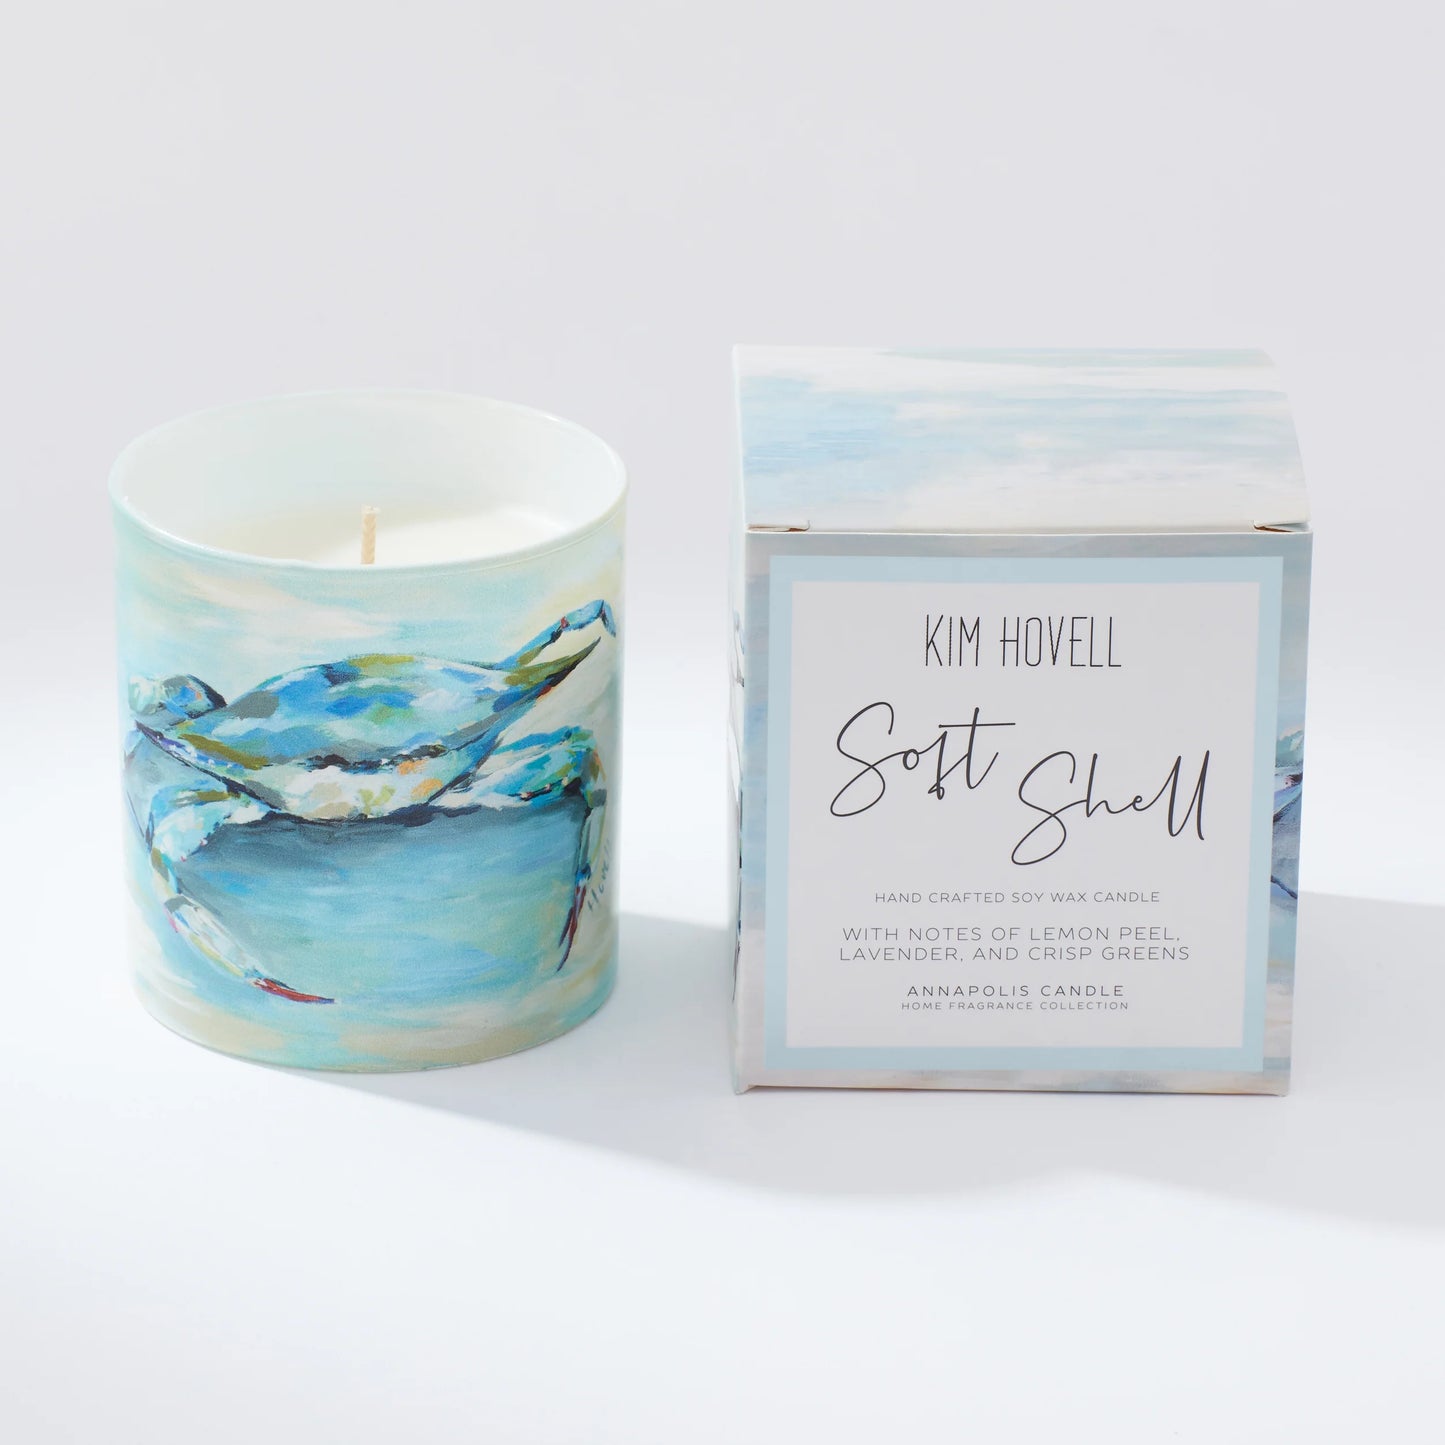 Kim Hovell 8 oz Soft Shell Boxed Candle